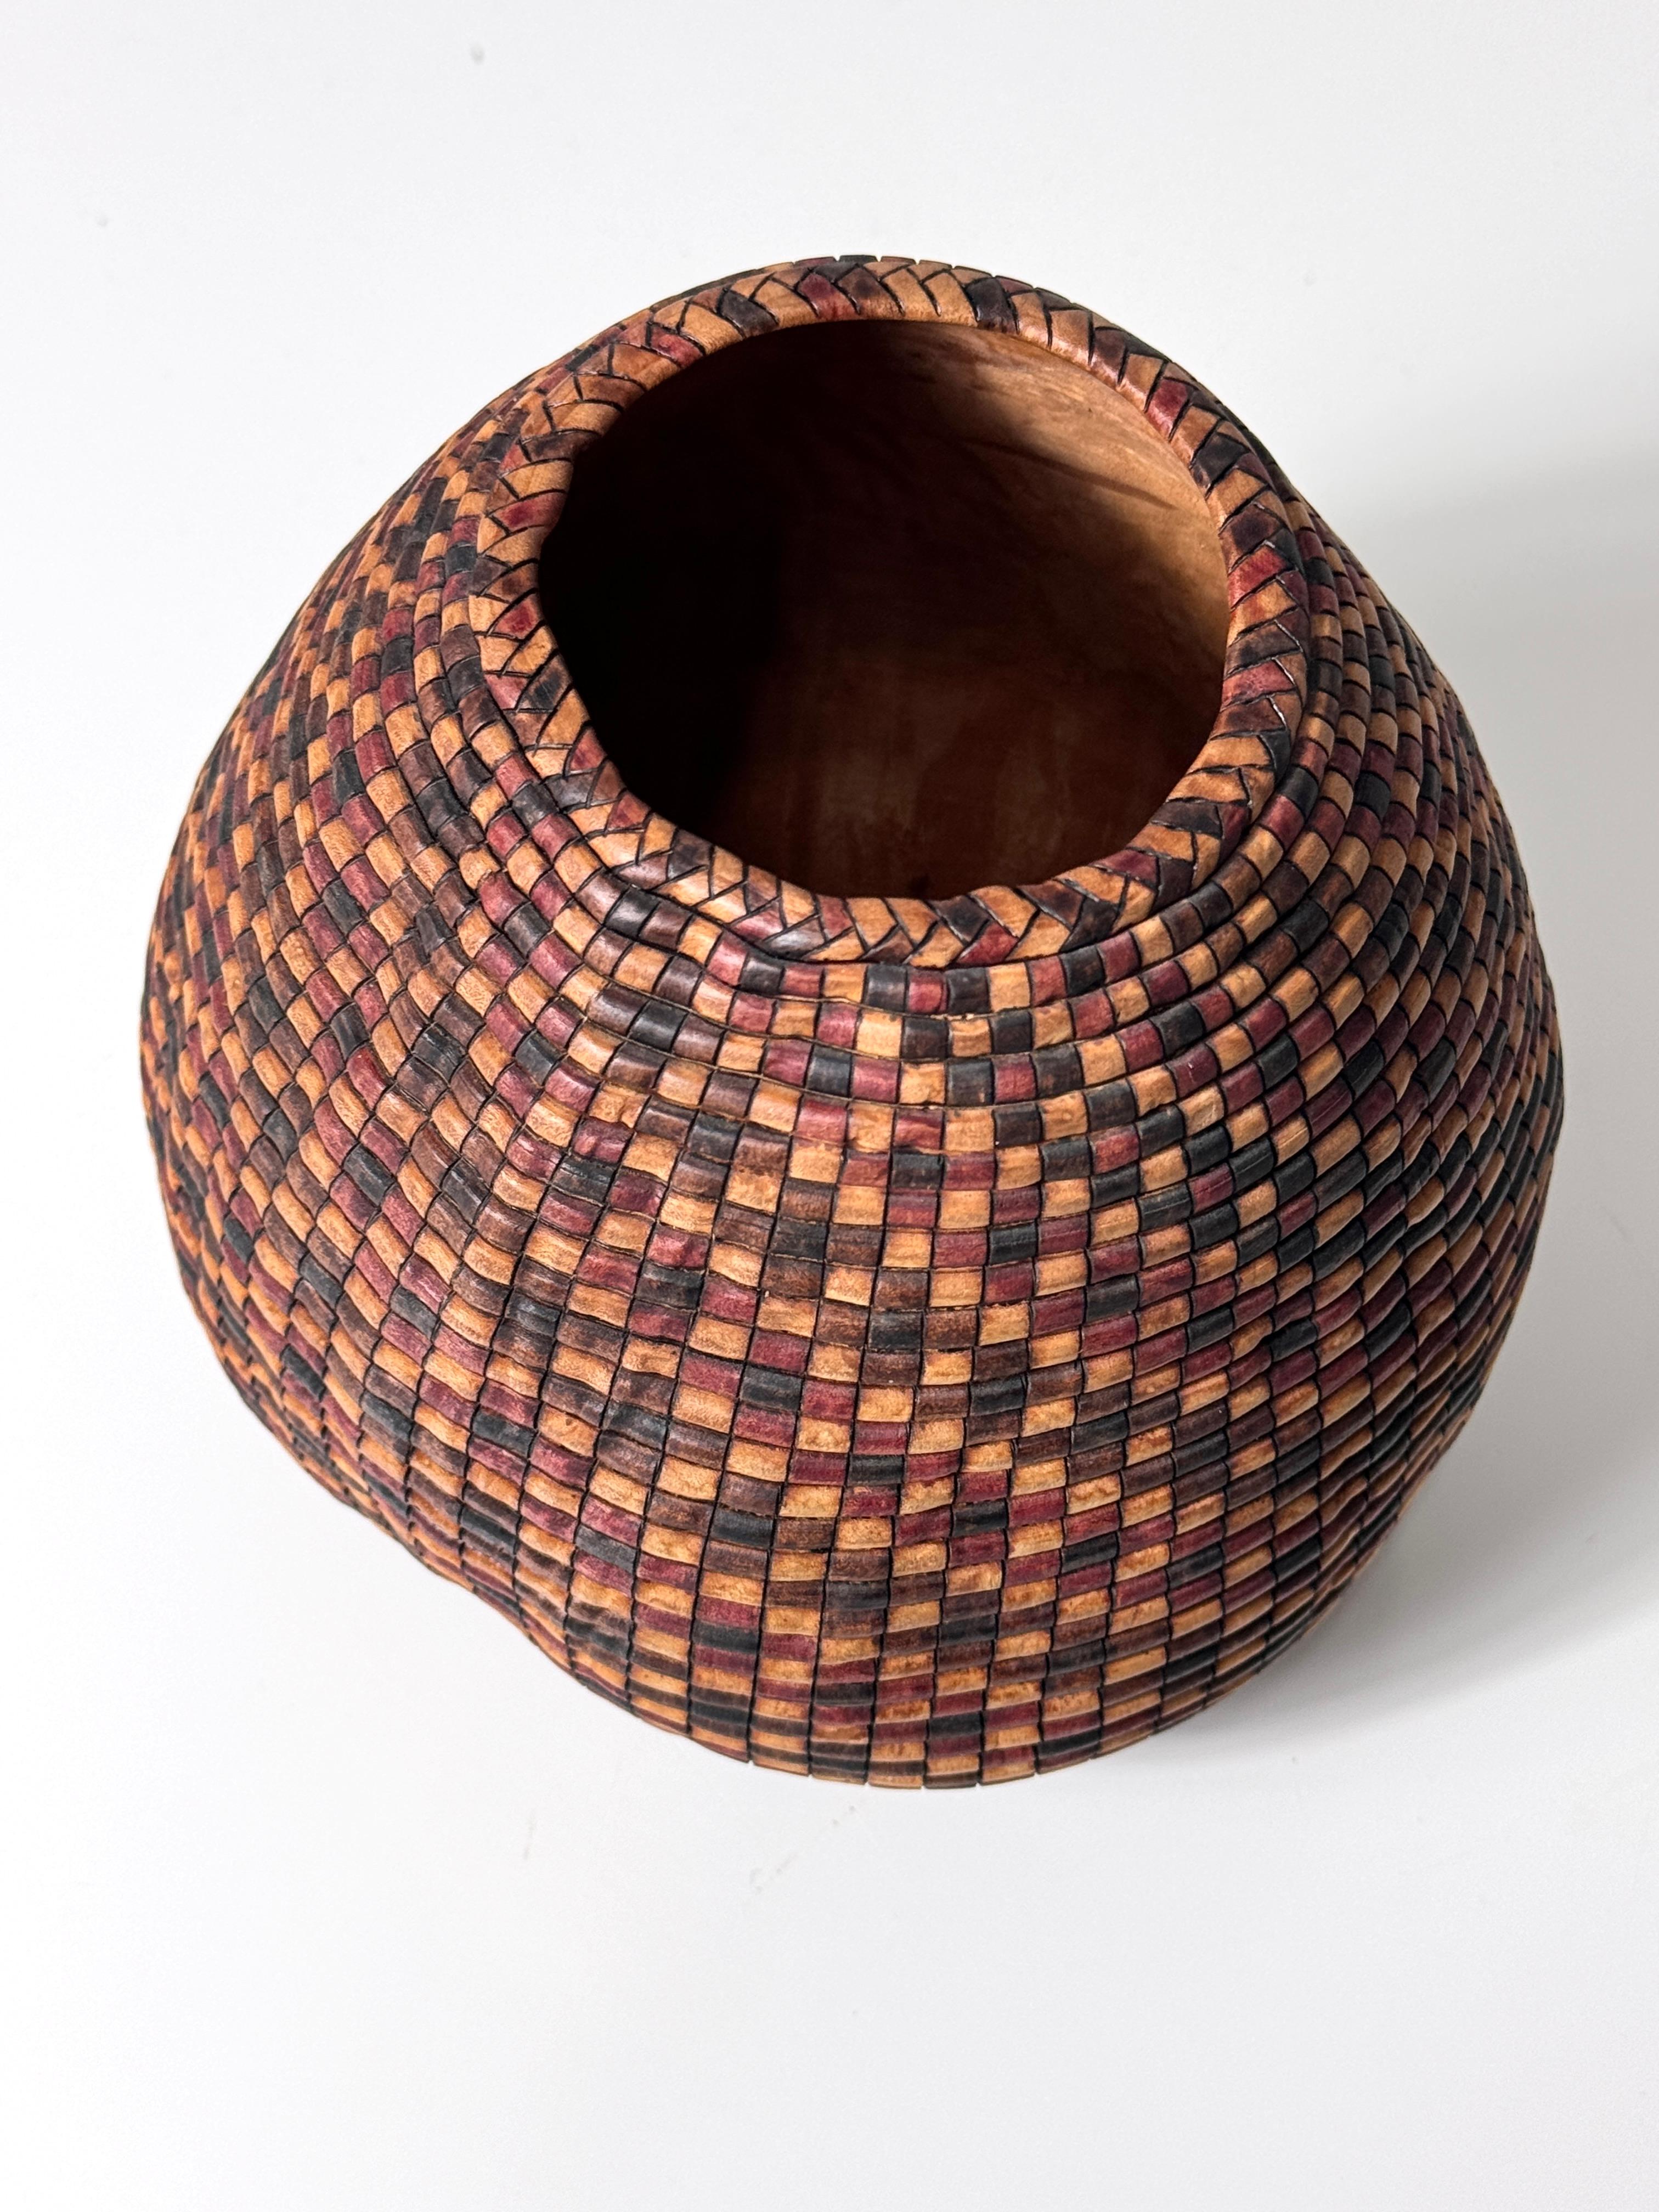 American Studio Turned Wood Basket Illusion Vessel Bowl by David Nittmann 1990s In Good Condition In Troy, MI